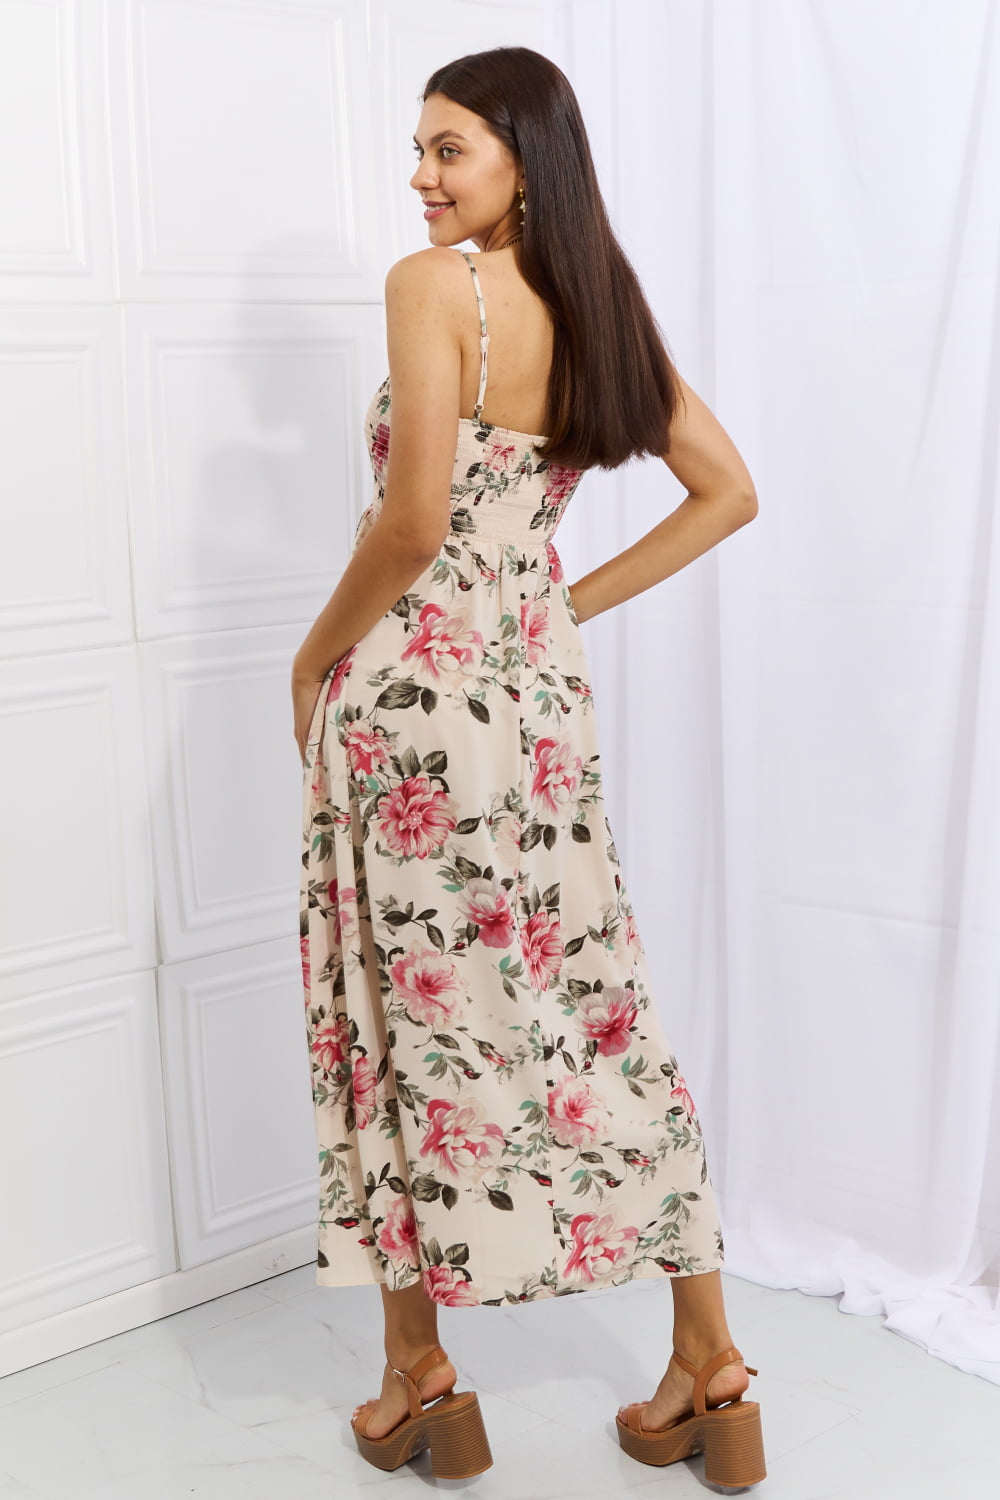 OneTheLand Hold Me Tight Sleevless Floral Maxi Dress in Pink Dress